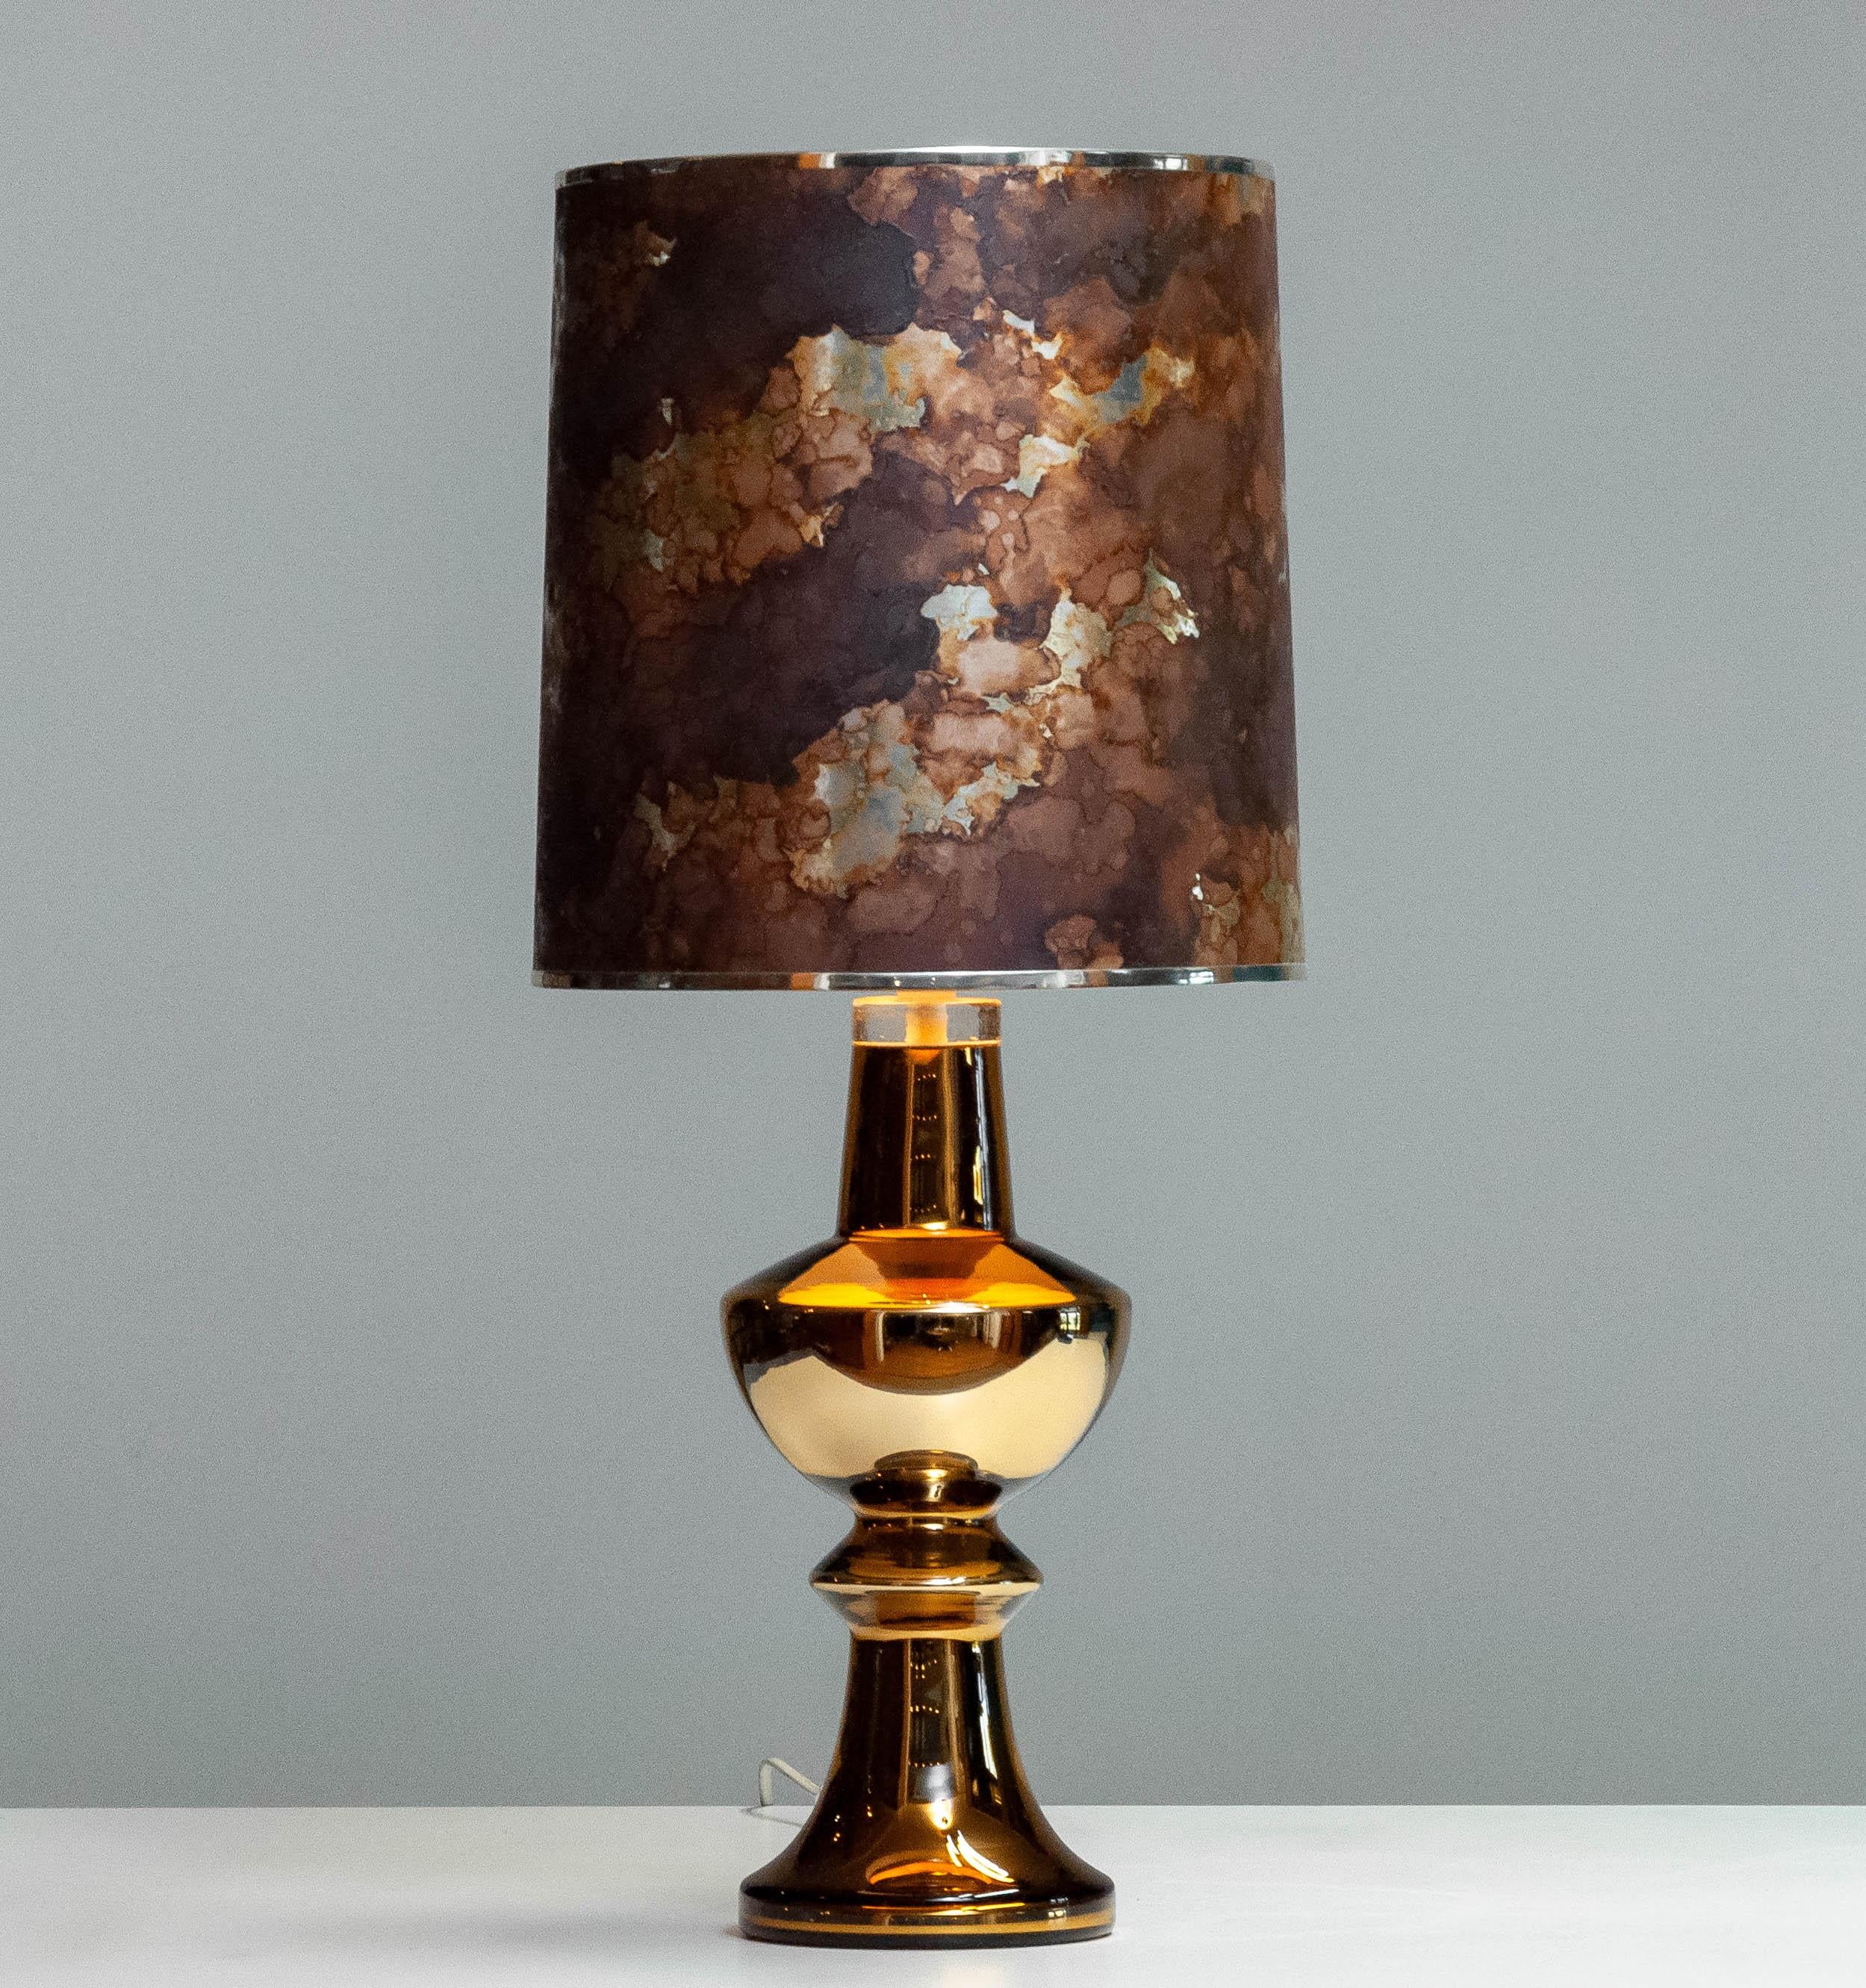 Beautiful golden art glass 'Brutalist' table lamp designed by Gustav Leek for Luxux Vitssjö Sweden from the 1960s with original brutalist shade.
This table lamp is overall in very good condition and can be used in an area with 110 and 230